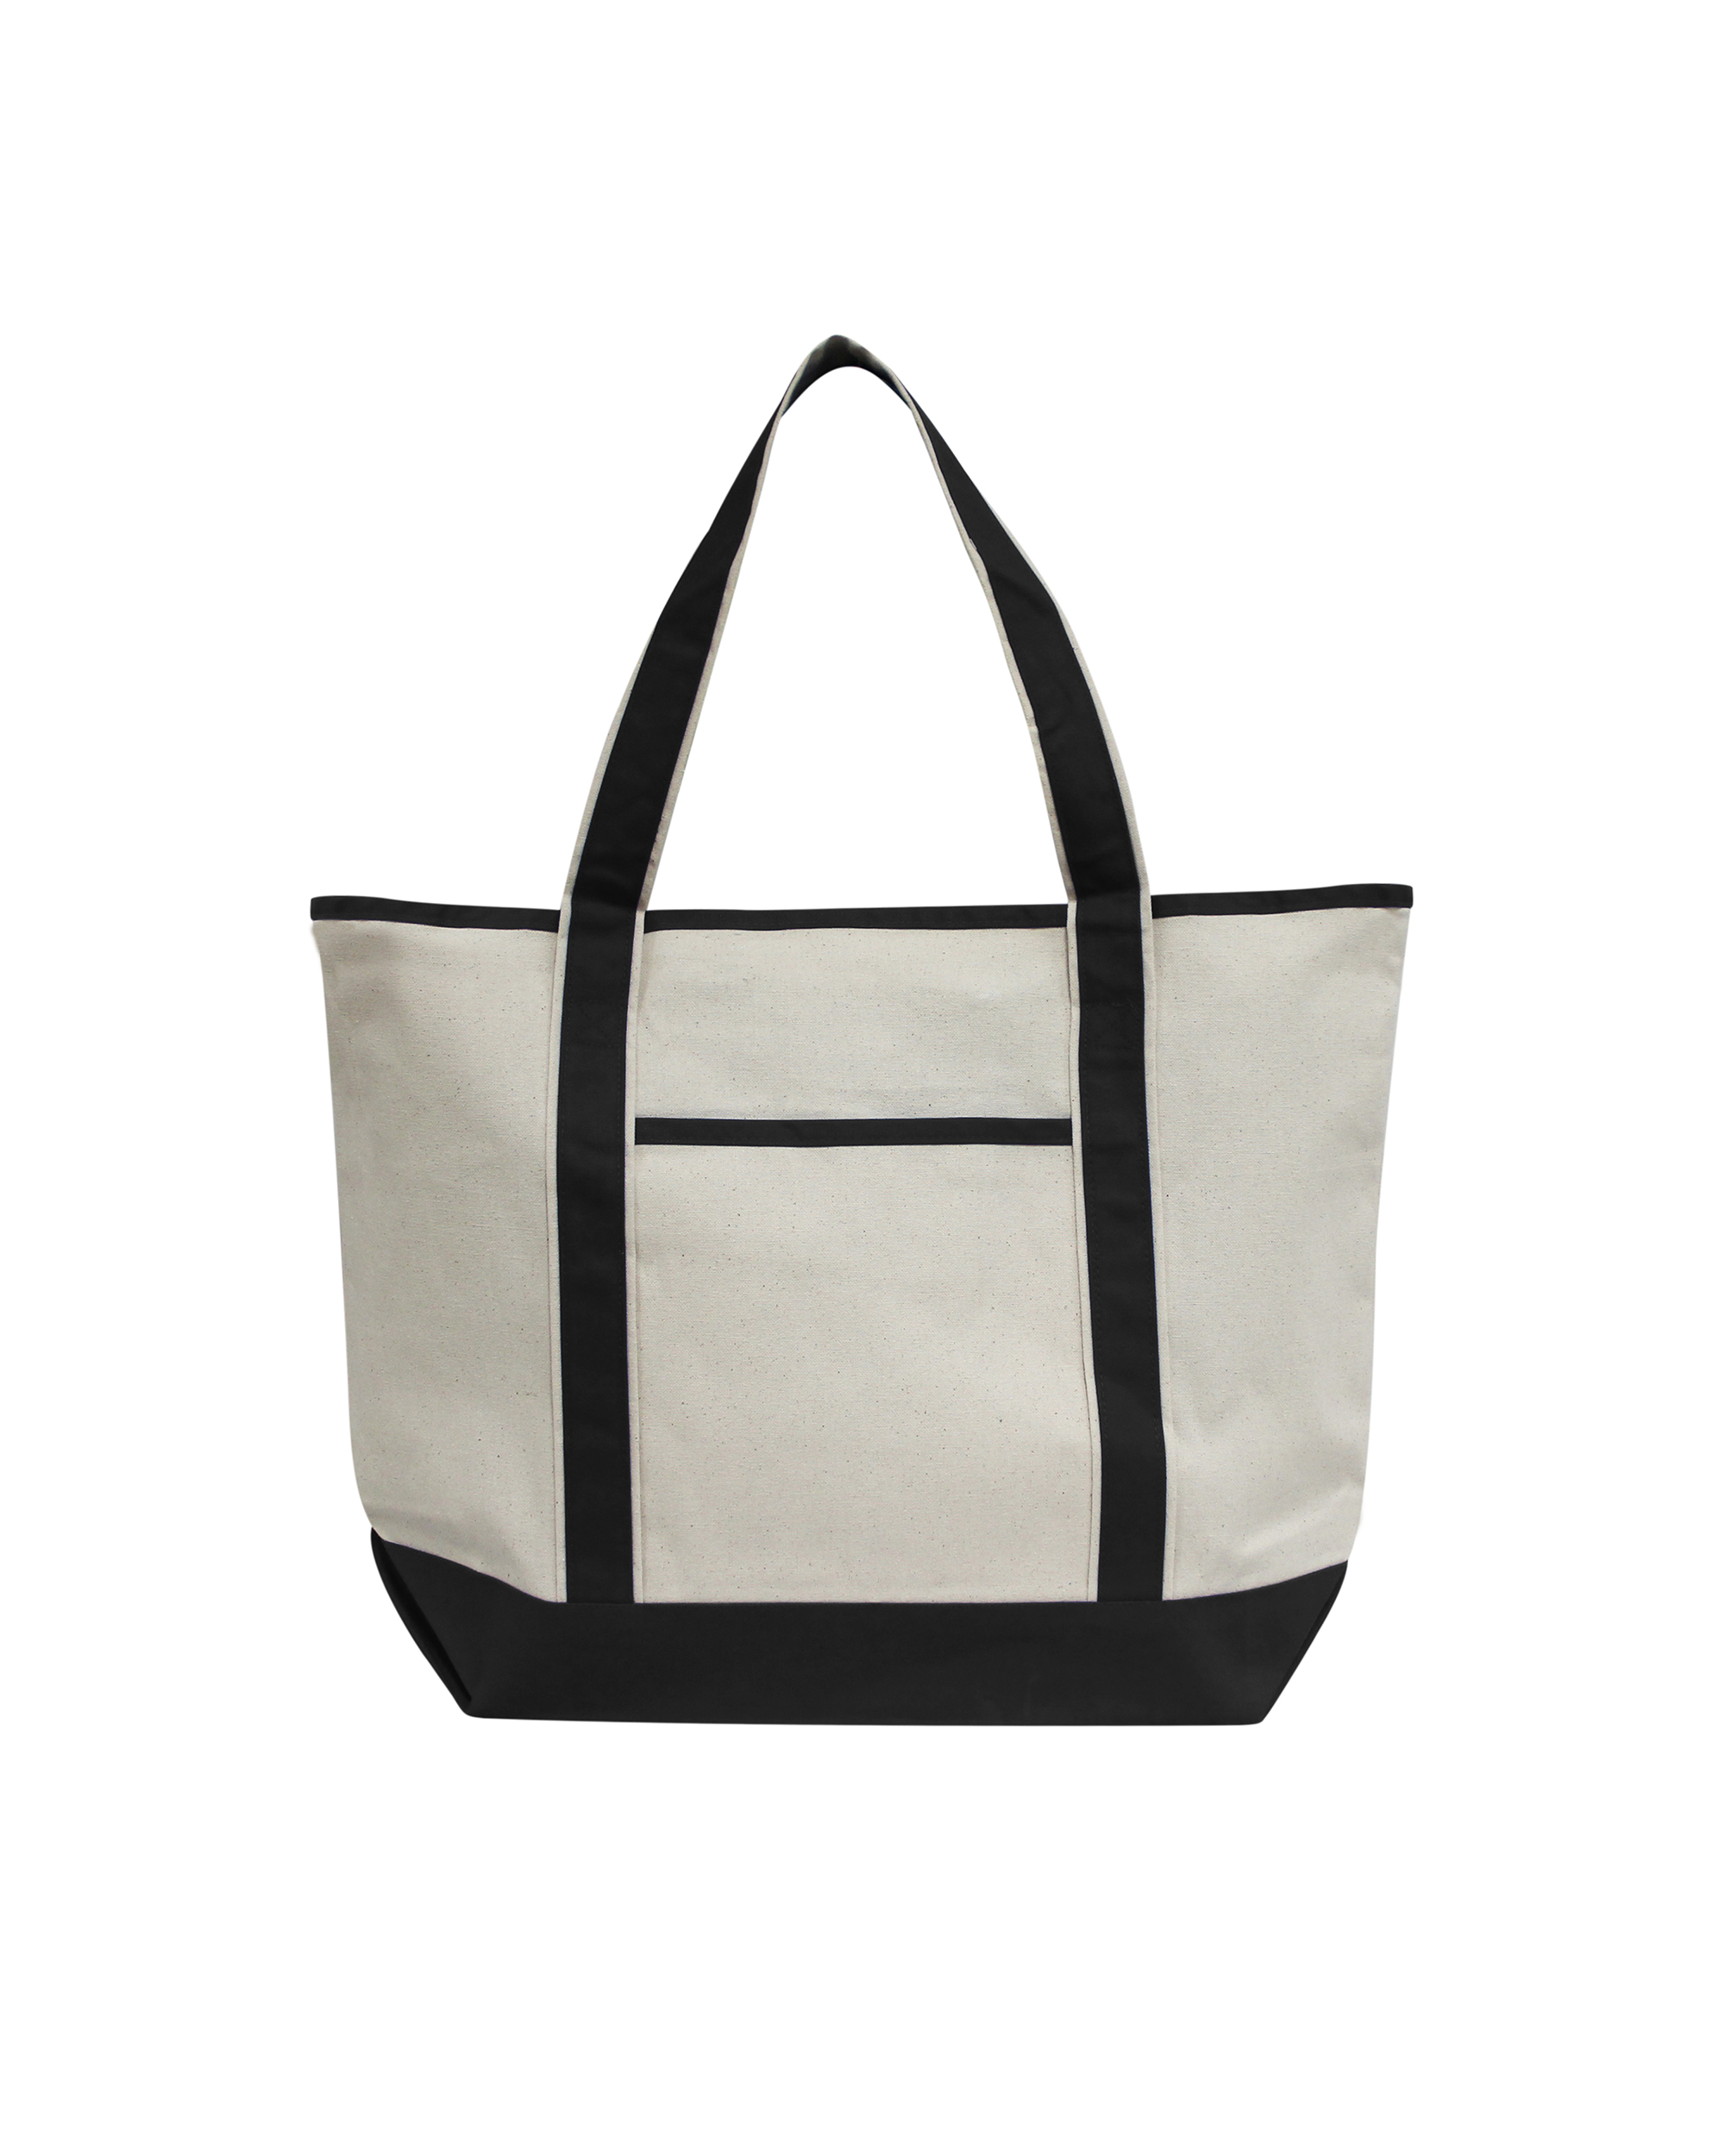 OAD® OAD103 Promotional Heavyweight Large Boat Tote